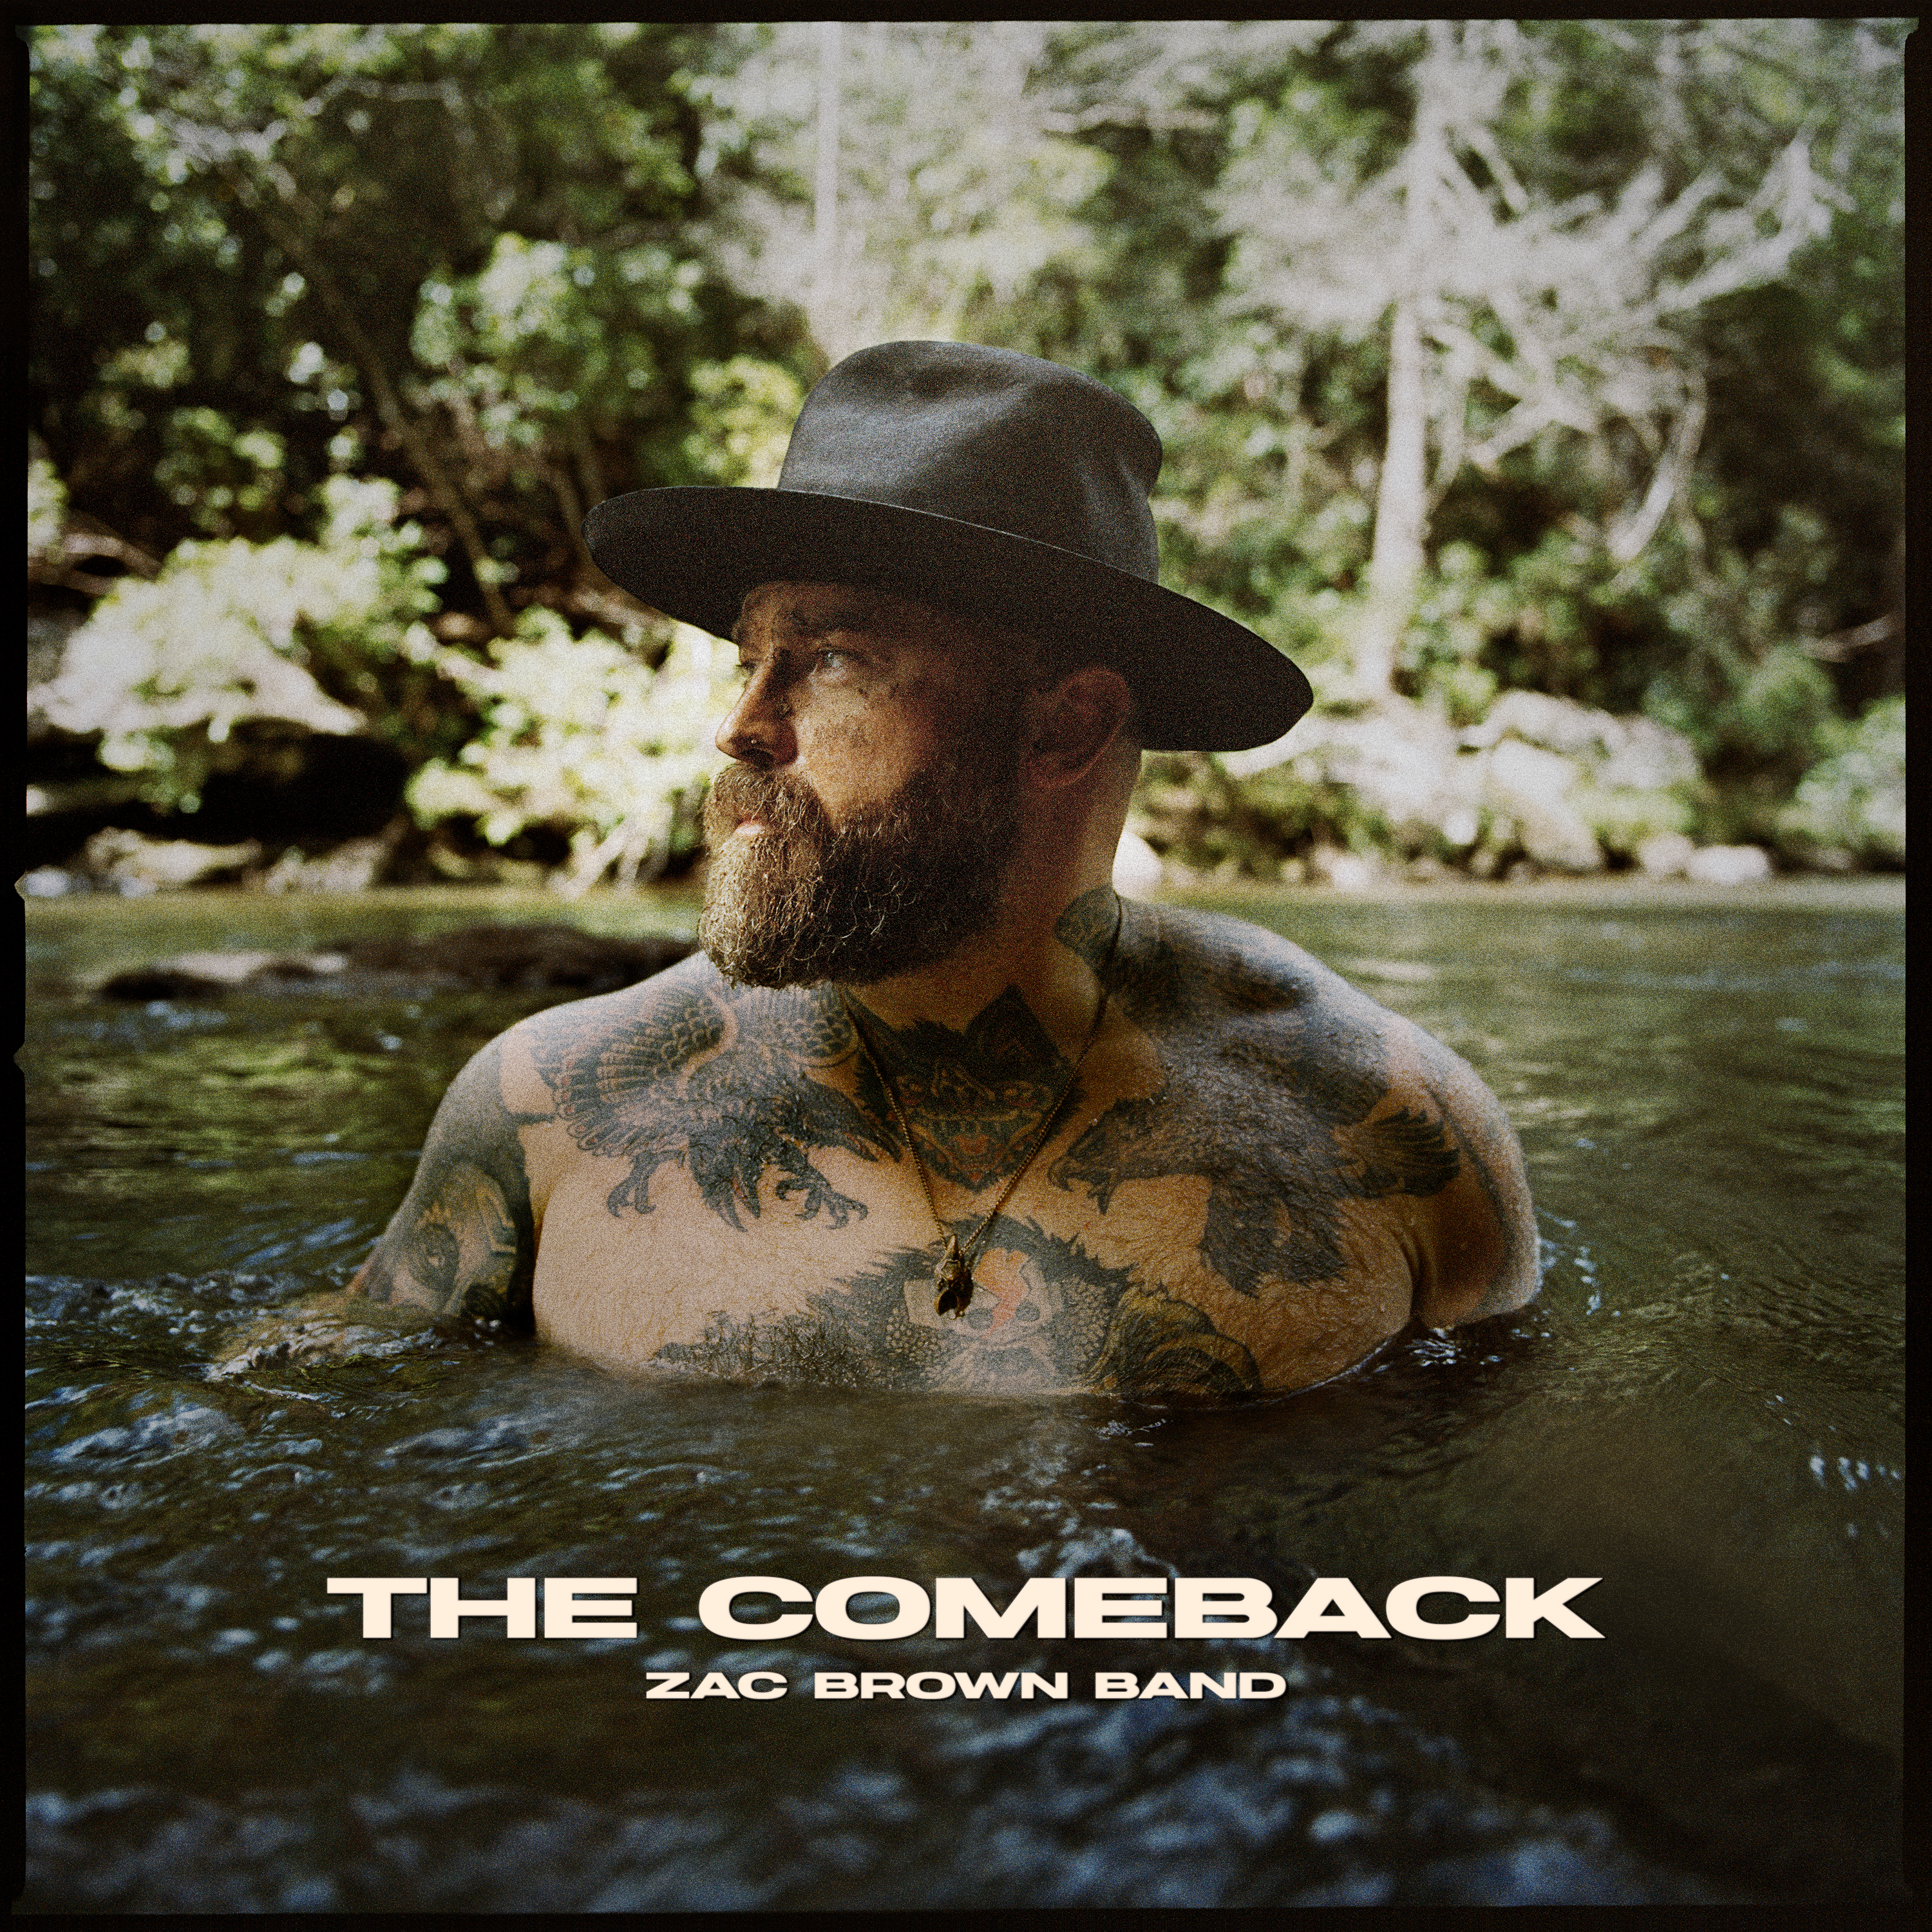 ZAC BROWN BAND’S THE COMEBACK IS NO. 1 NEW COUNTRY ALBUM RELEASE AND TOPS THE CURRENT COUNTRY ALBUMS SALES CHART